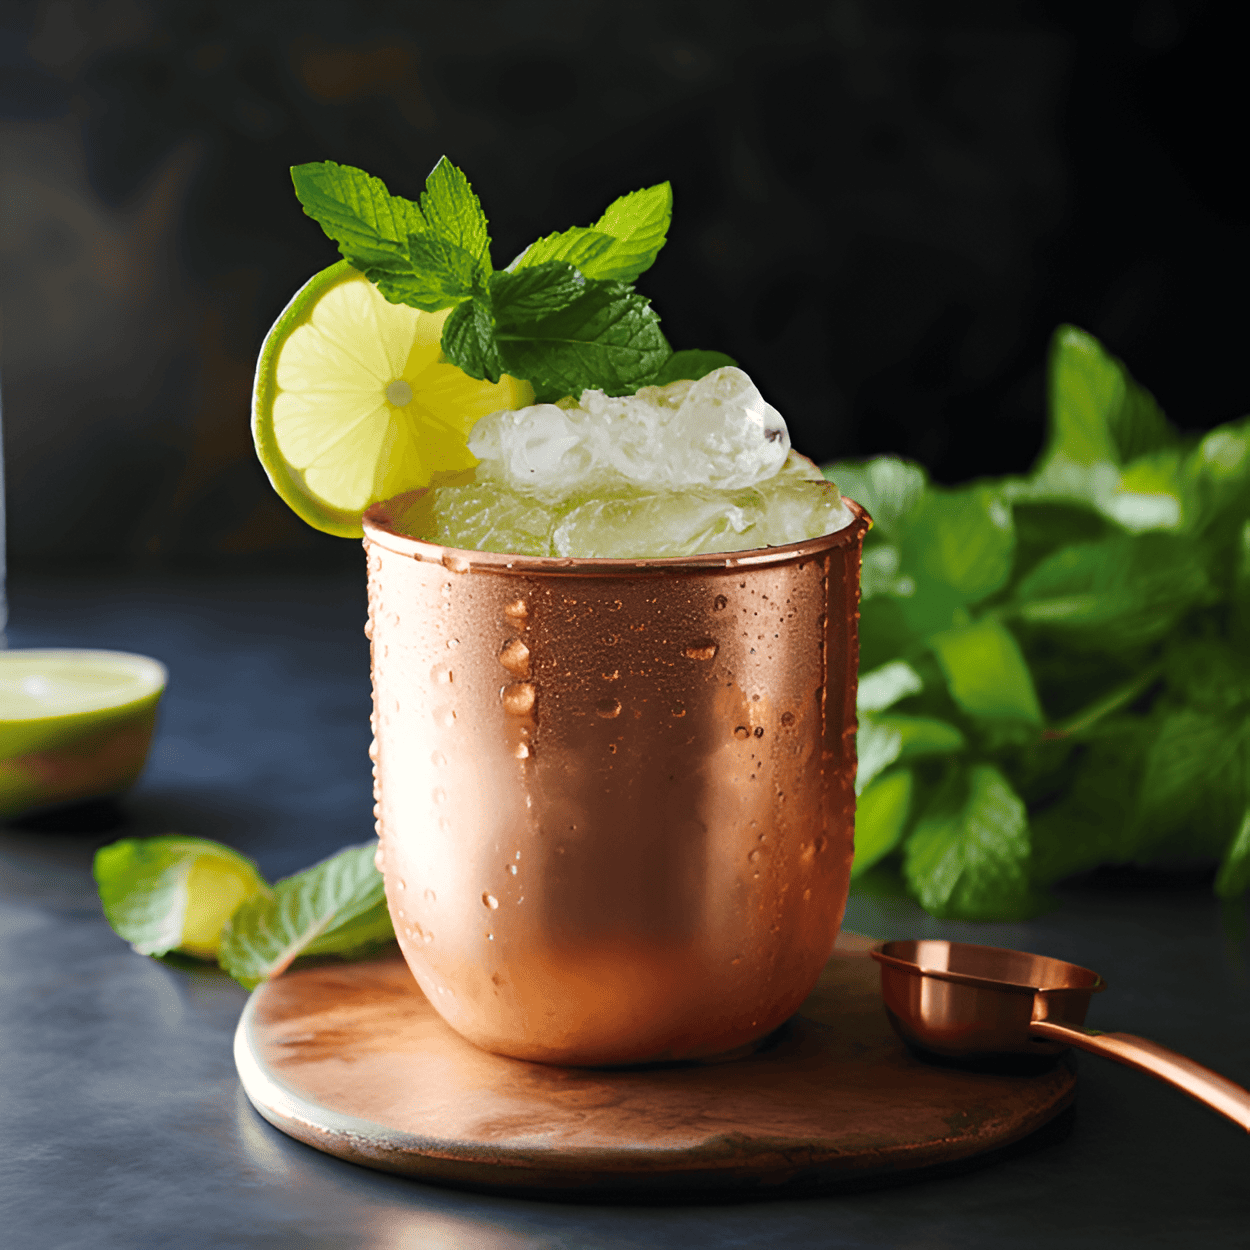 Kyiv Mule Cocktail Recipe - The Kyiv Mule is a refreshing, zesty cocktail with a spicy kick. The combination of Ukrainian vodka, ginger beer, and lime juice creates a balanced flavor profile that is both sweet and tangy. The addition of mint leaves adds a fresh, aromatic finish.